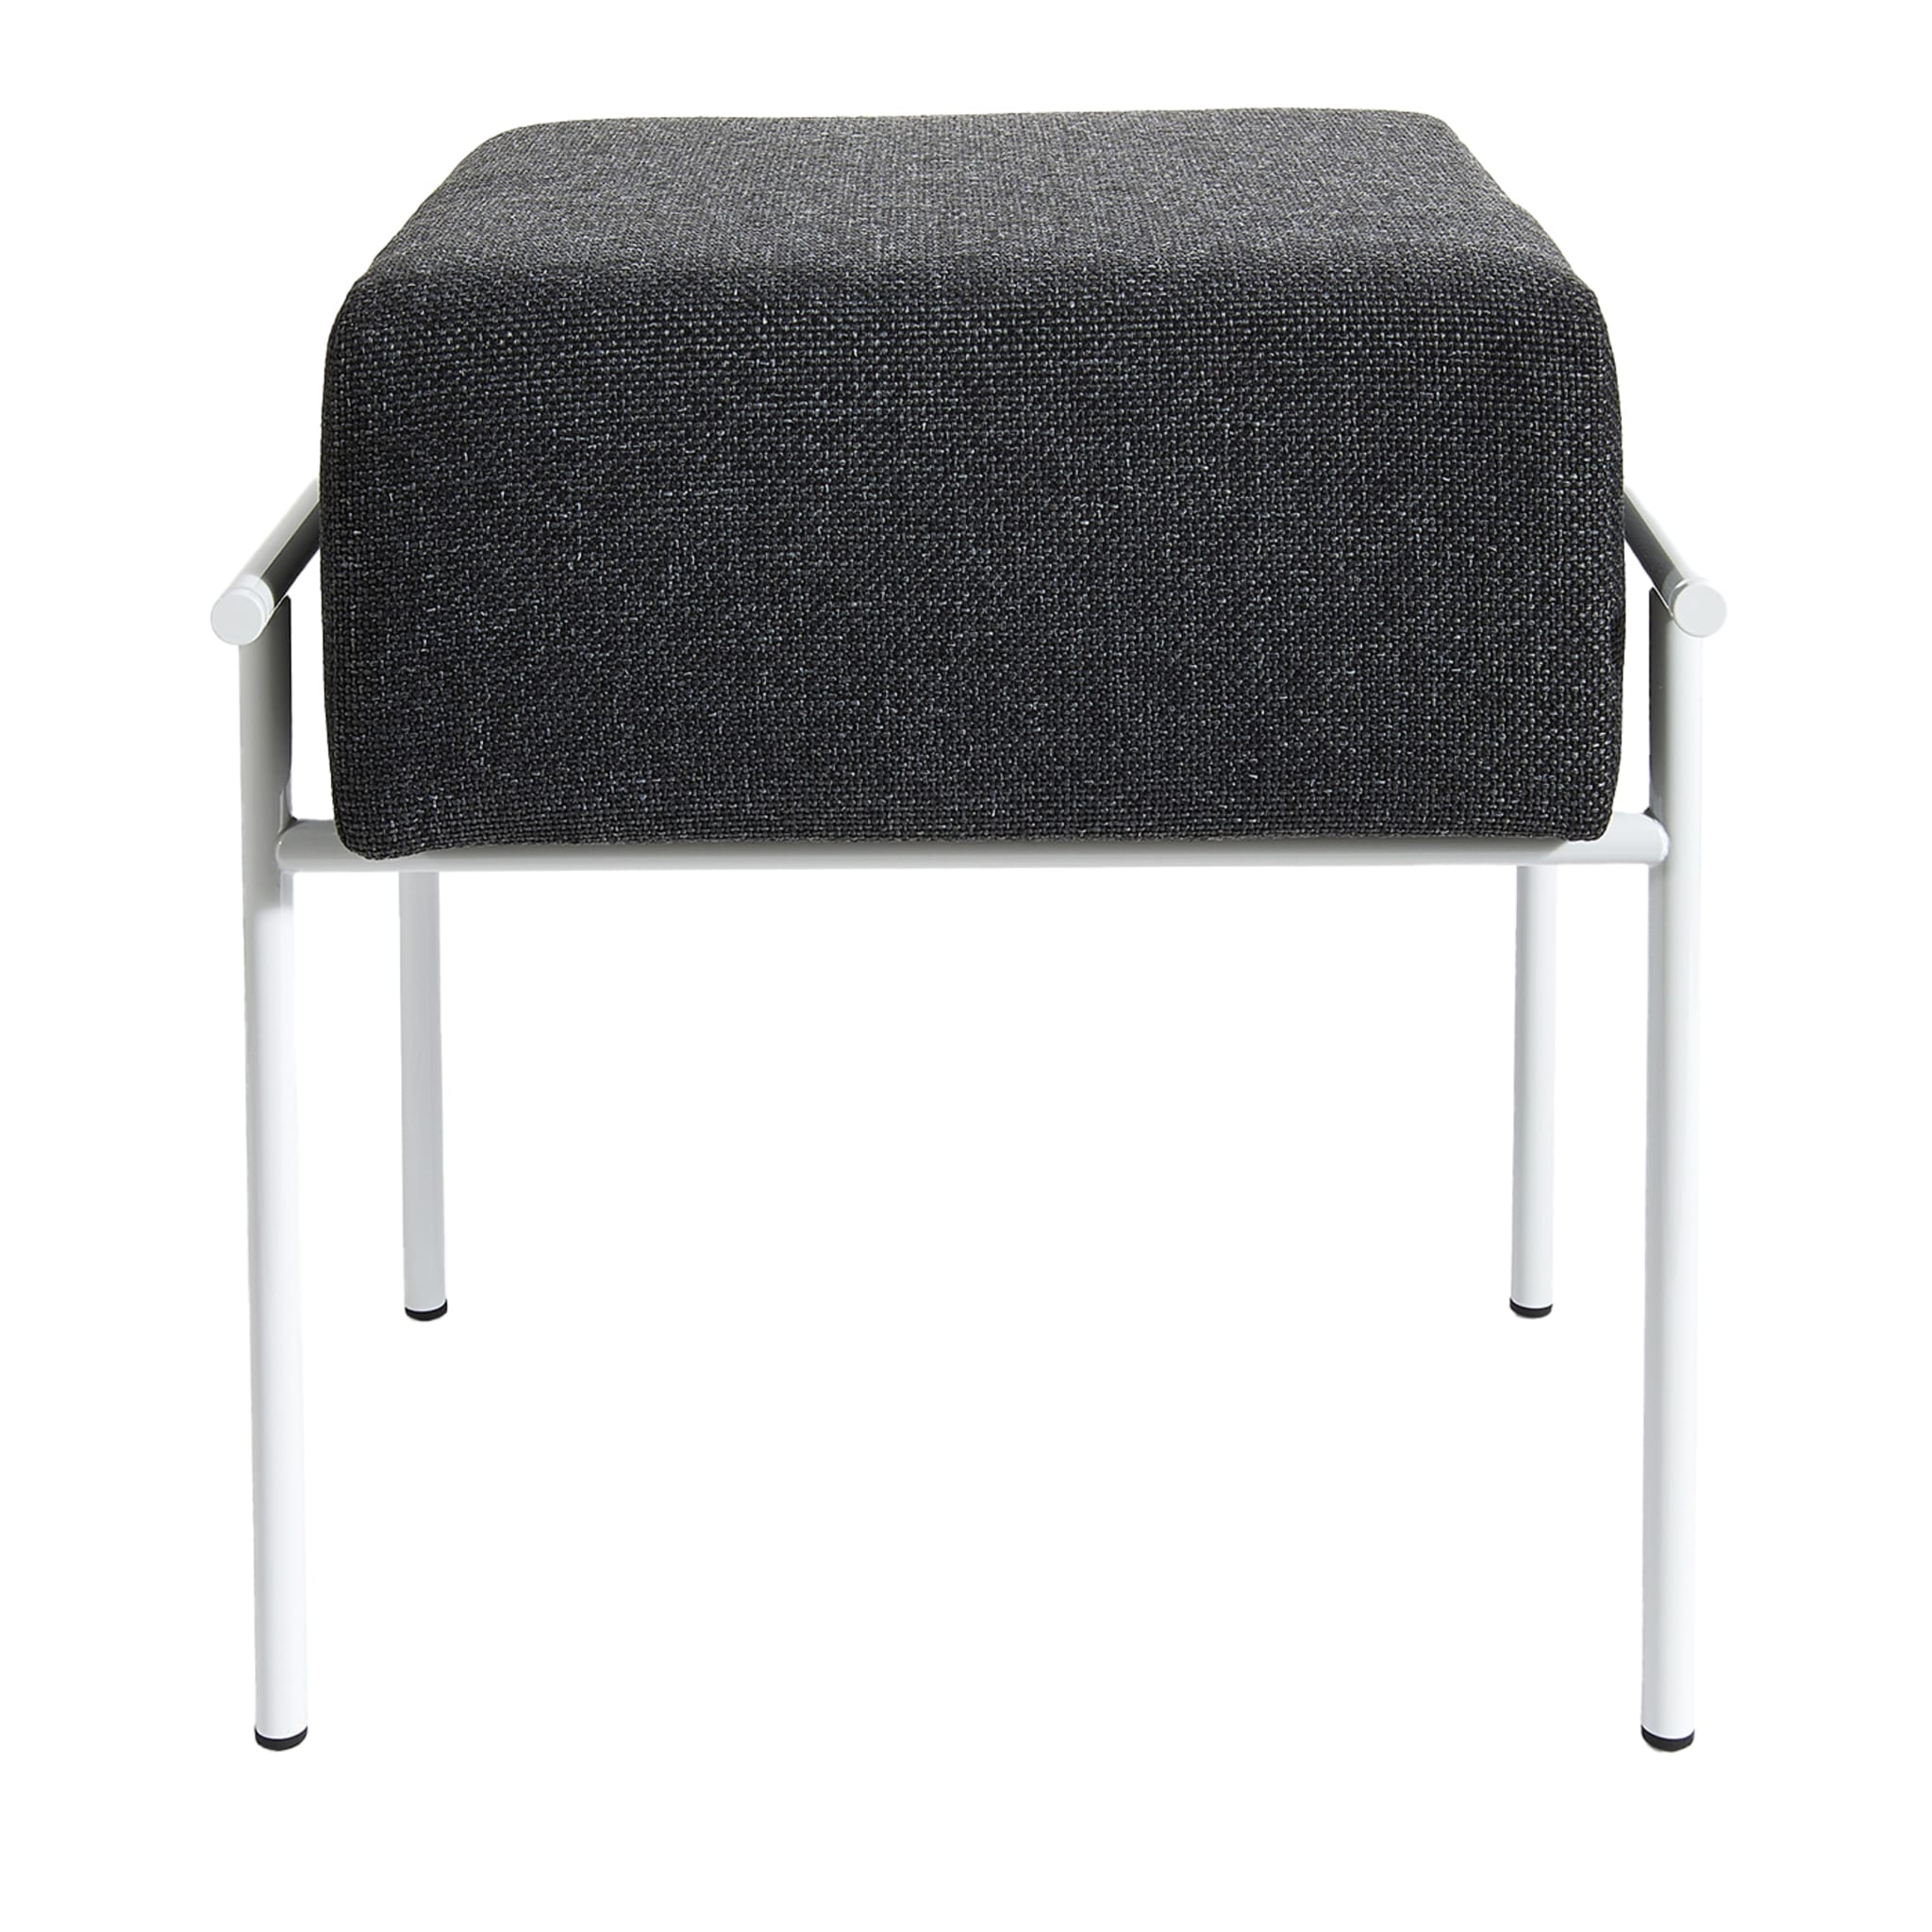 Tao Low Padded Stool with White Frame  by Uto Balmoral - Main view